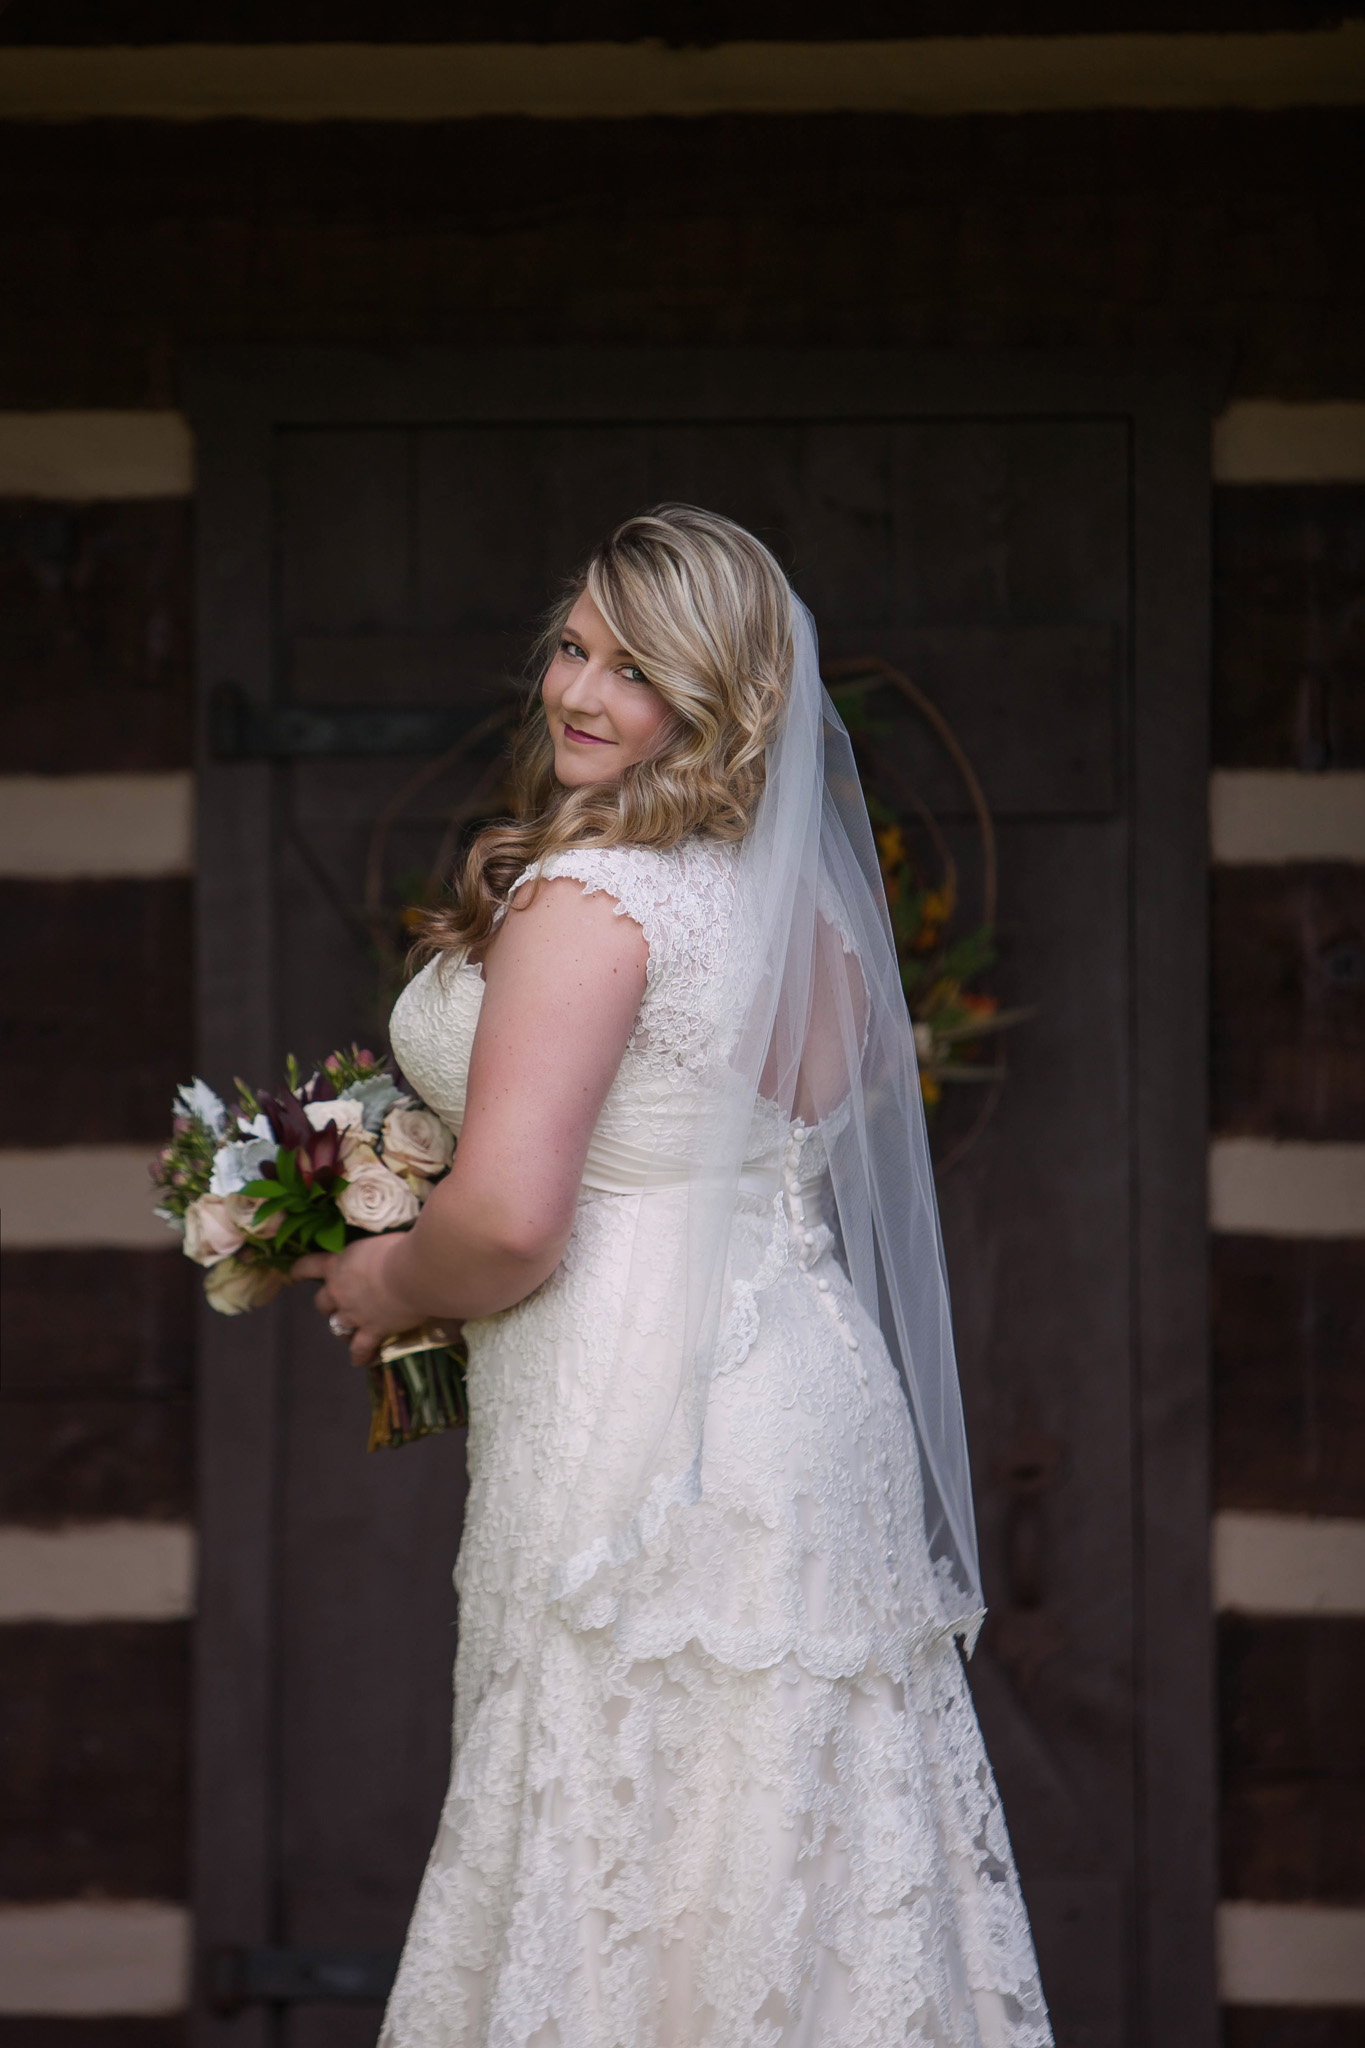 Bridal Portrait in Asheboro, NC Photography by Mabyn Ludke 